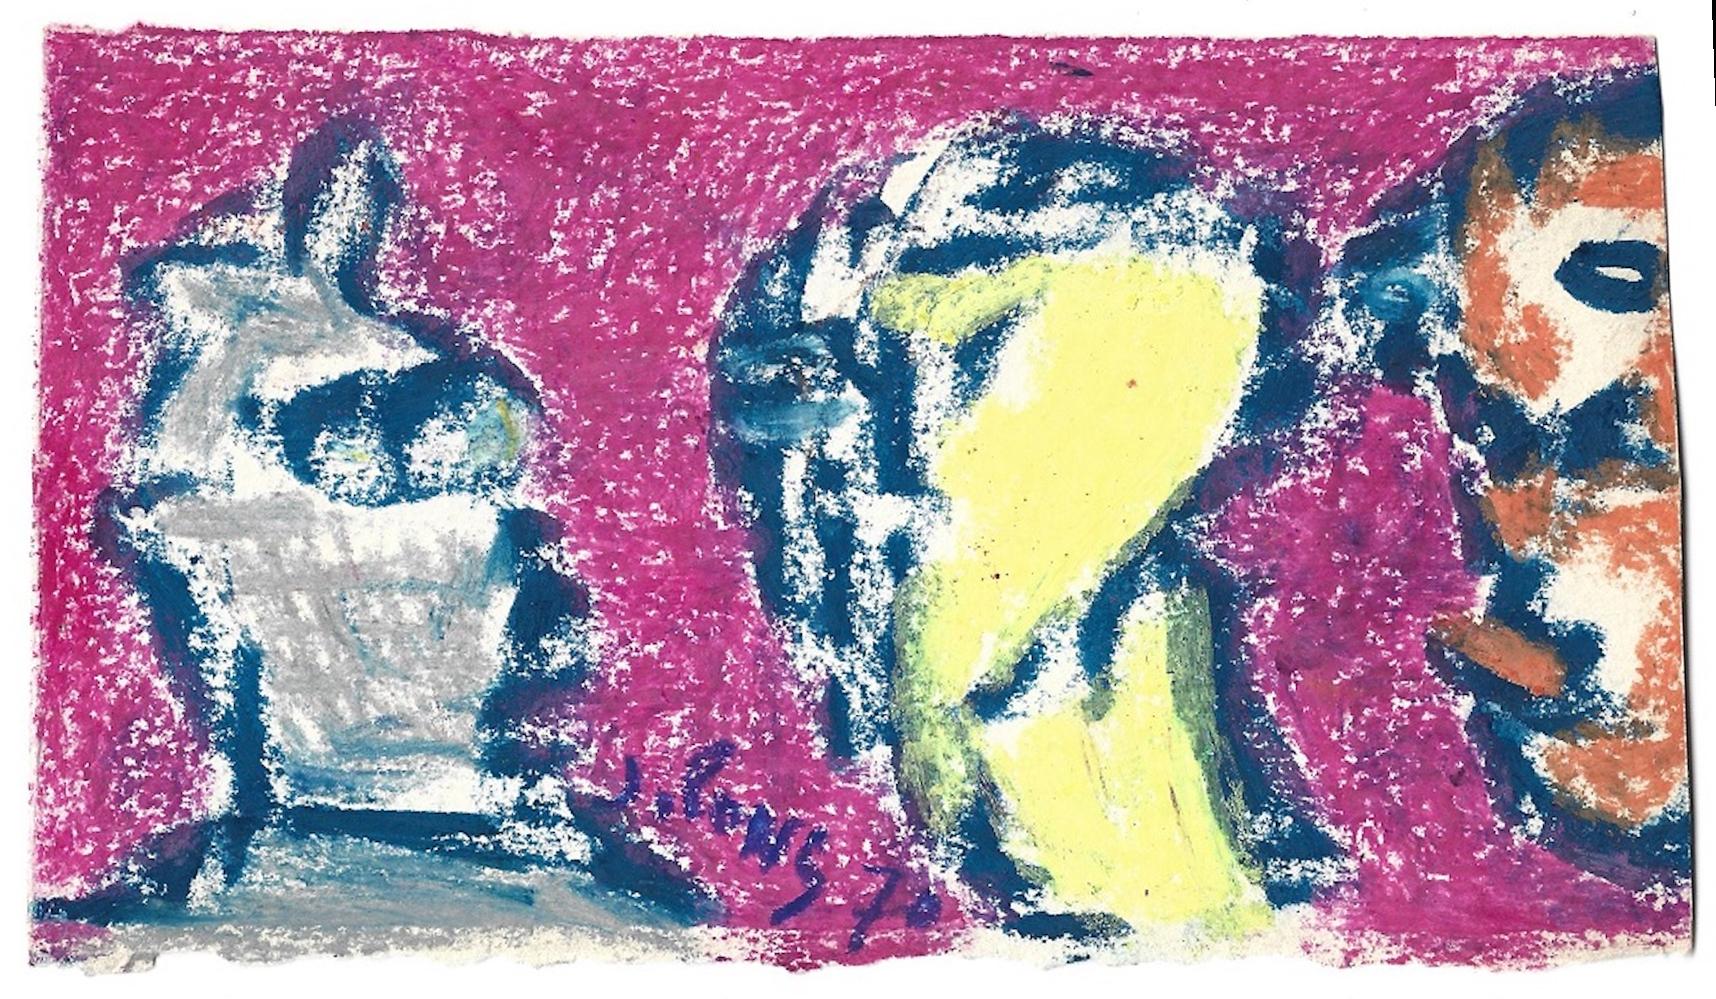 Composition  is an original oil pastels drawing on paper, realized in 1970 by the French artist Jean Pons (1913- 2005). 

This contemporary artwork, signed and dated on the front and on the lower margin at the center, reports autograph notes (a